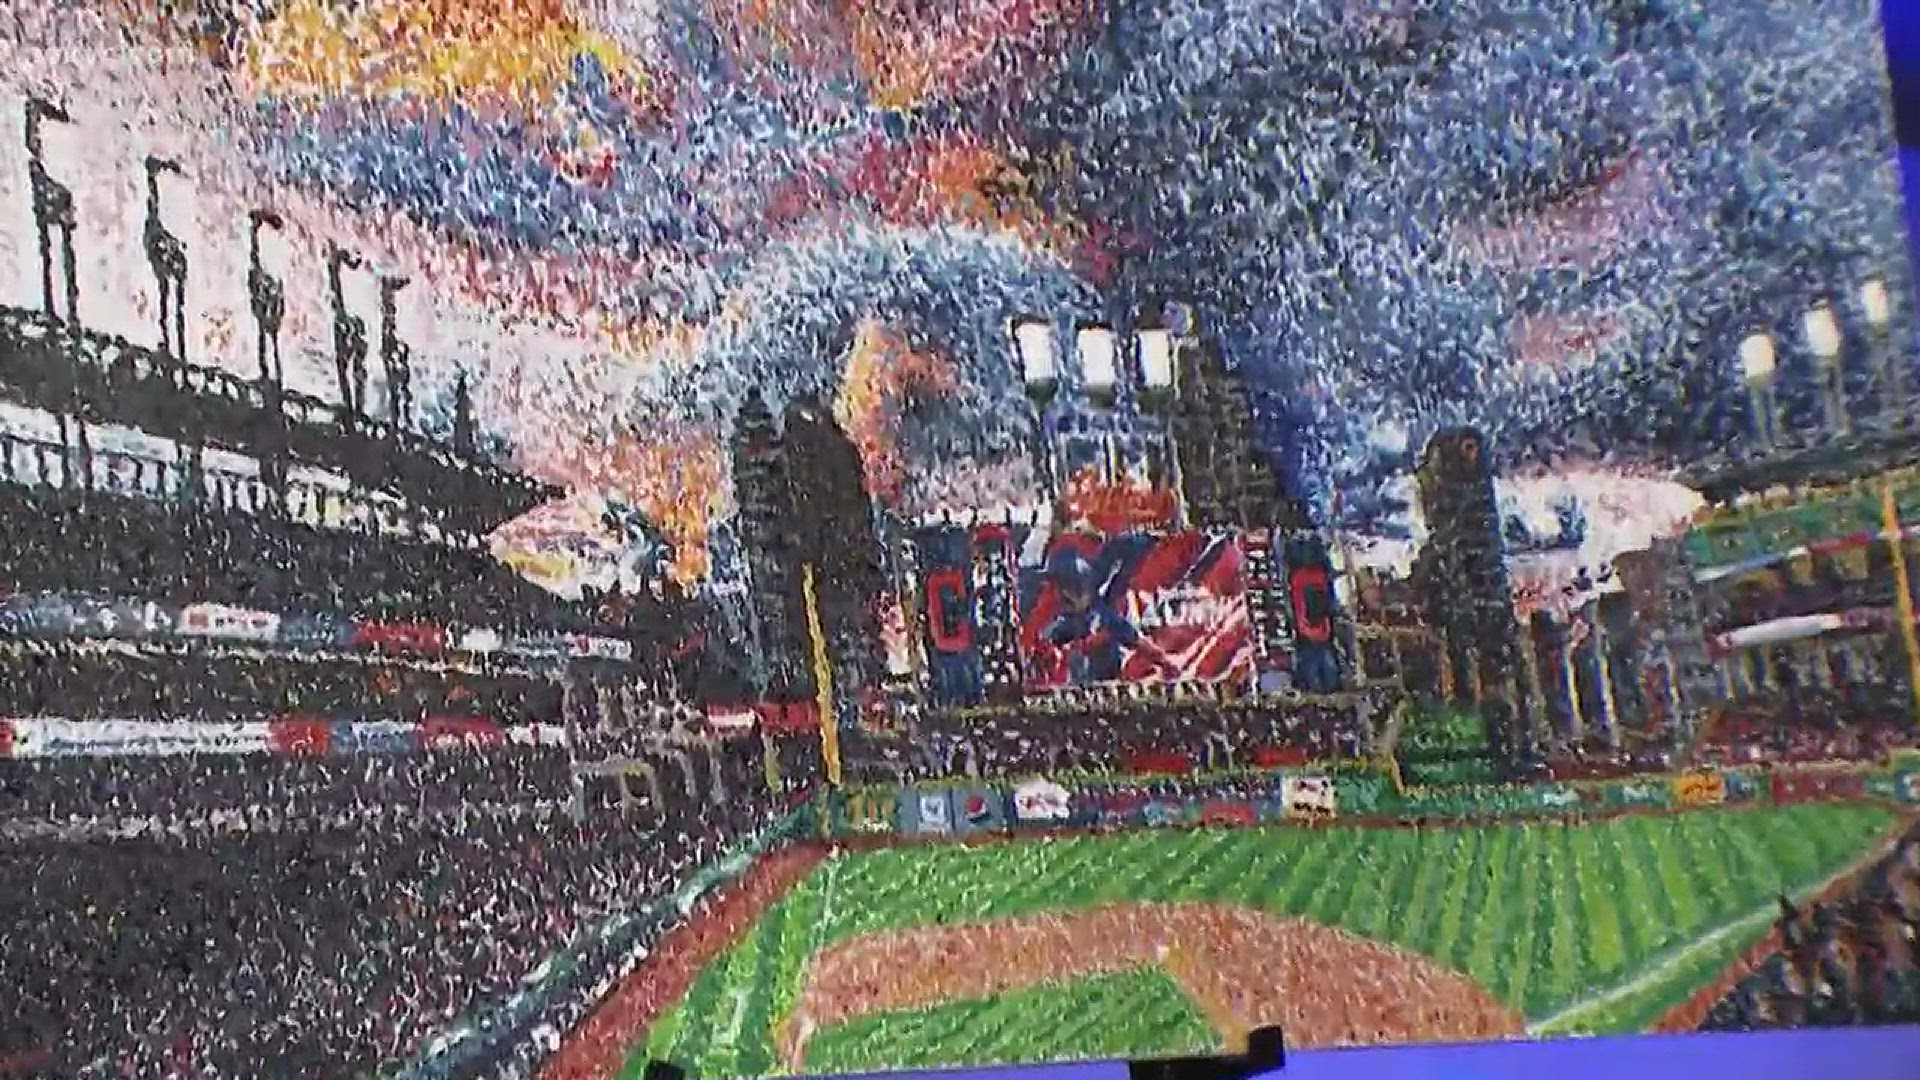 Dec. 1, 2017: From Progressive Field to the shot with Kyrie Irving, local artist Patrick Geyer uses paint to capture the spirit of Cleveland.